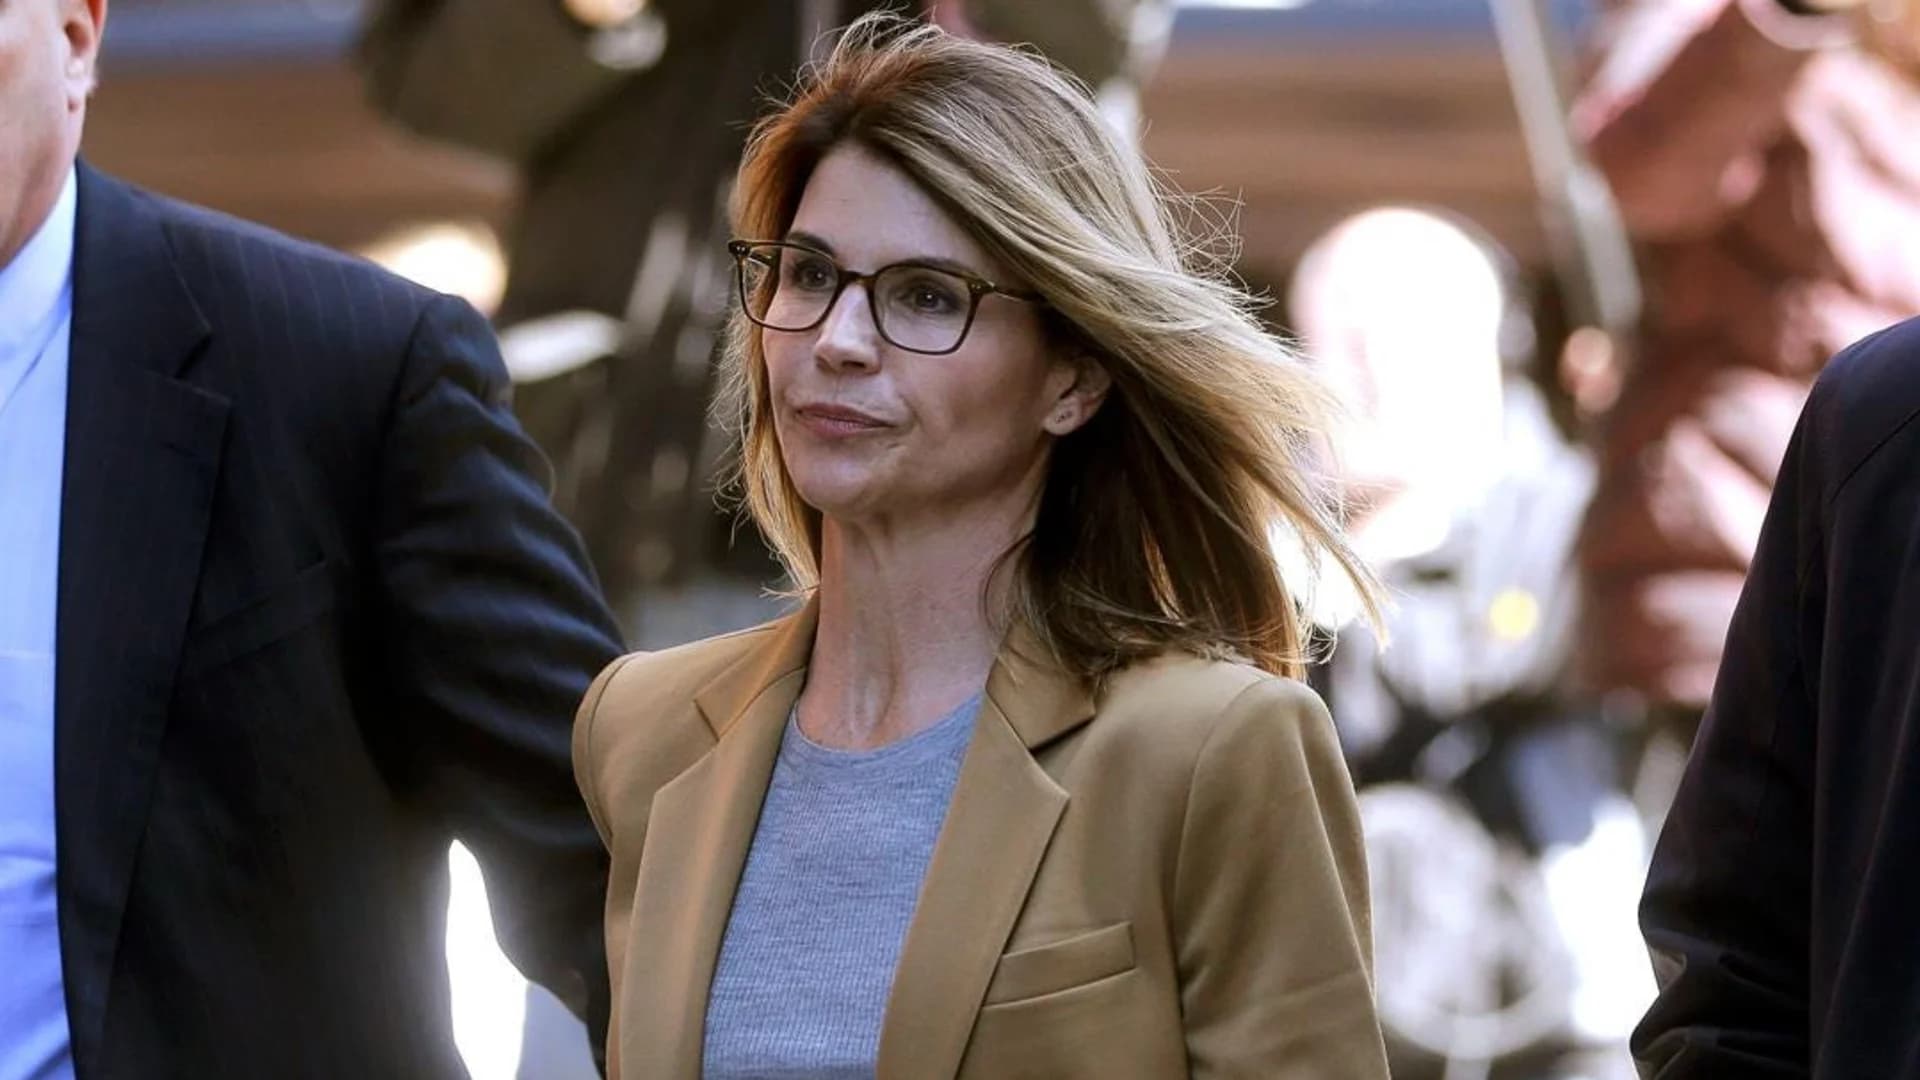 Court papers: Actress Lori Loughlin, husband to plead guilty in college admissions bribery case